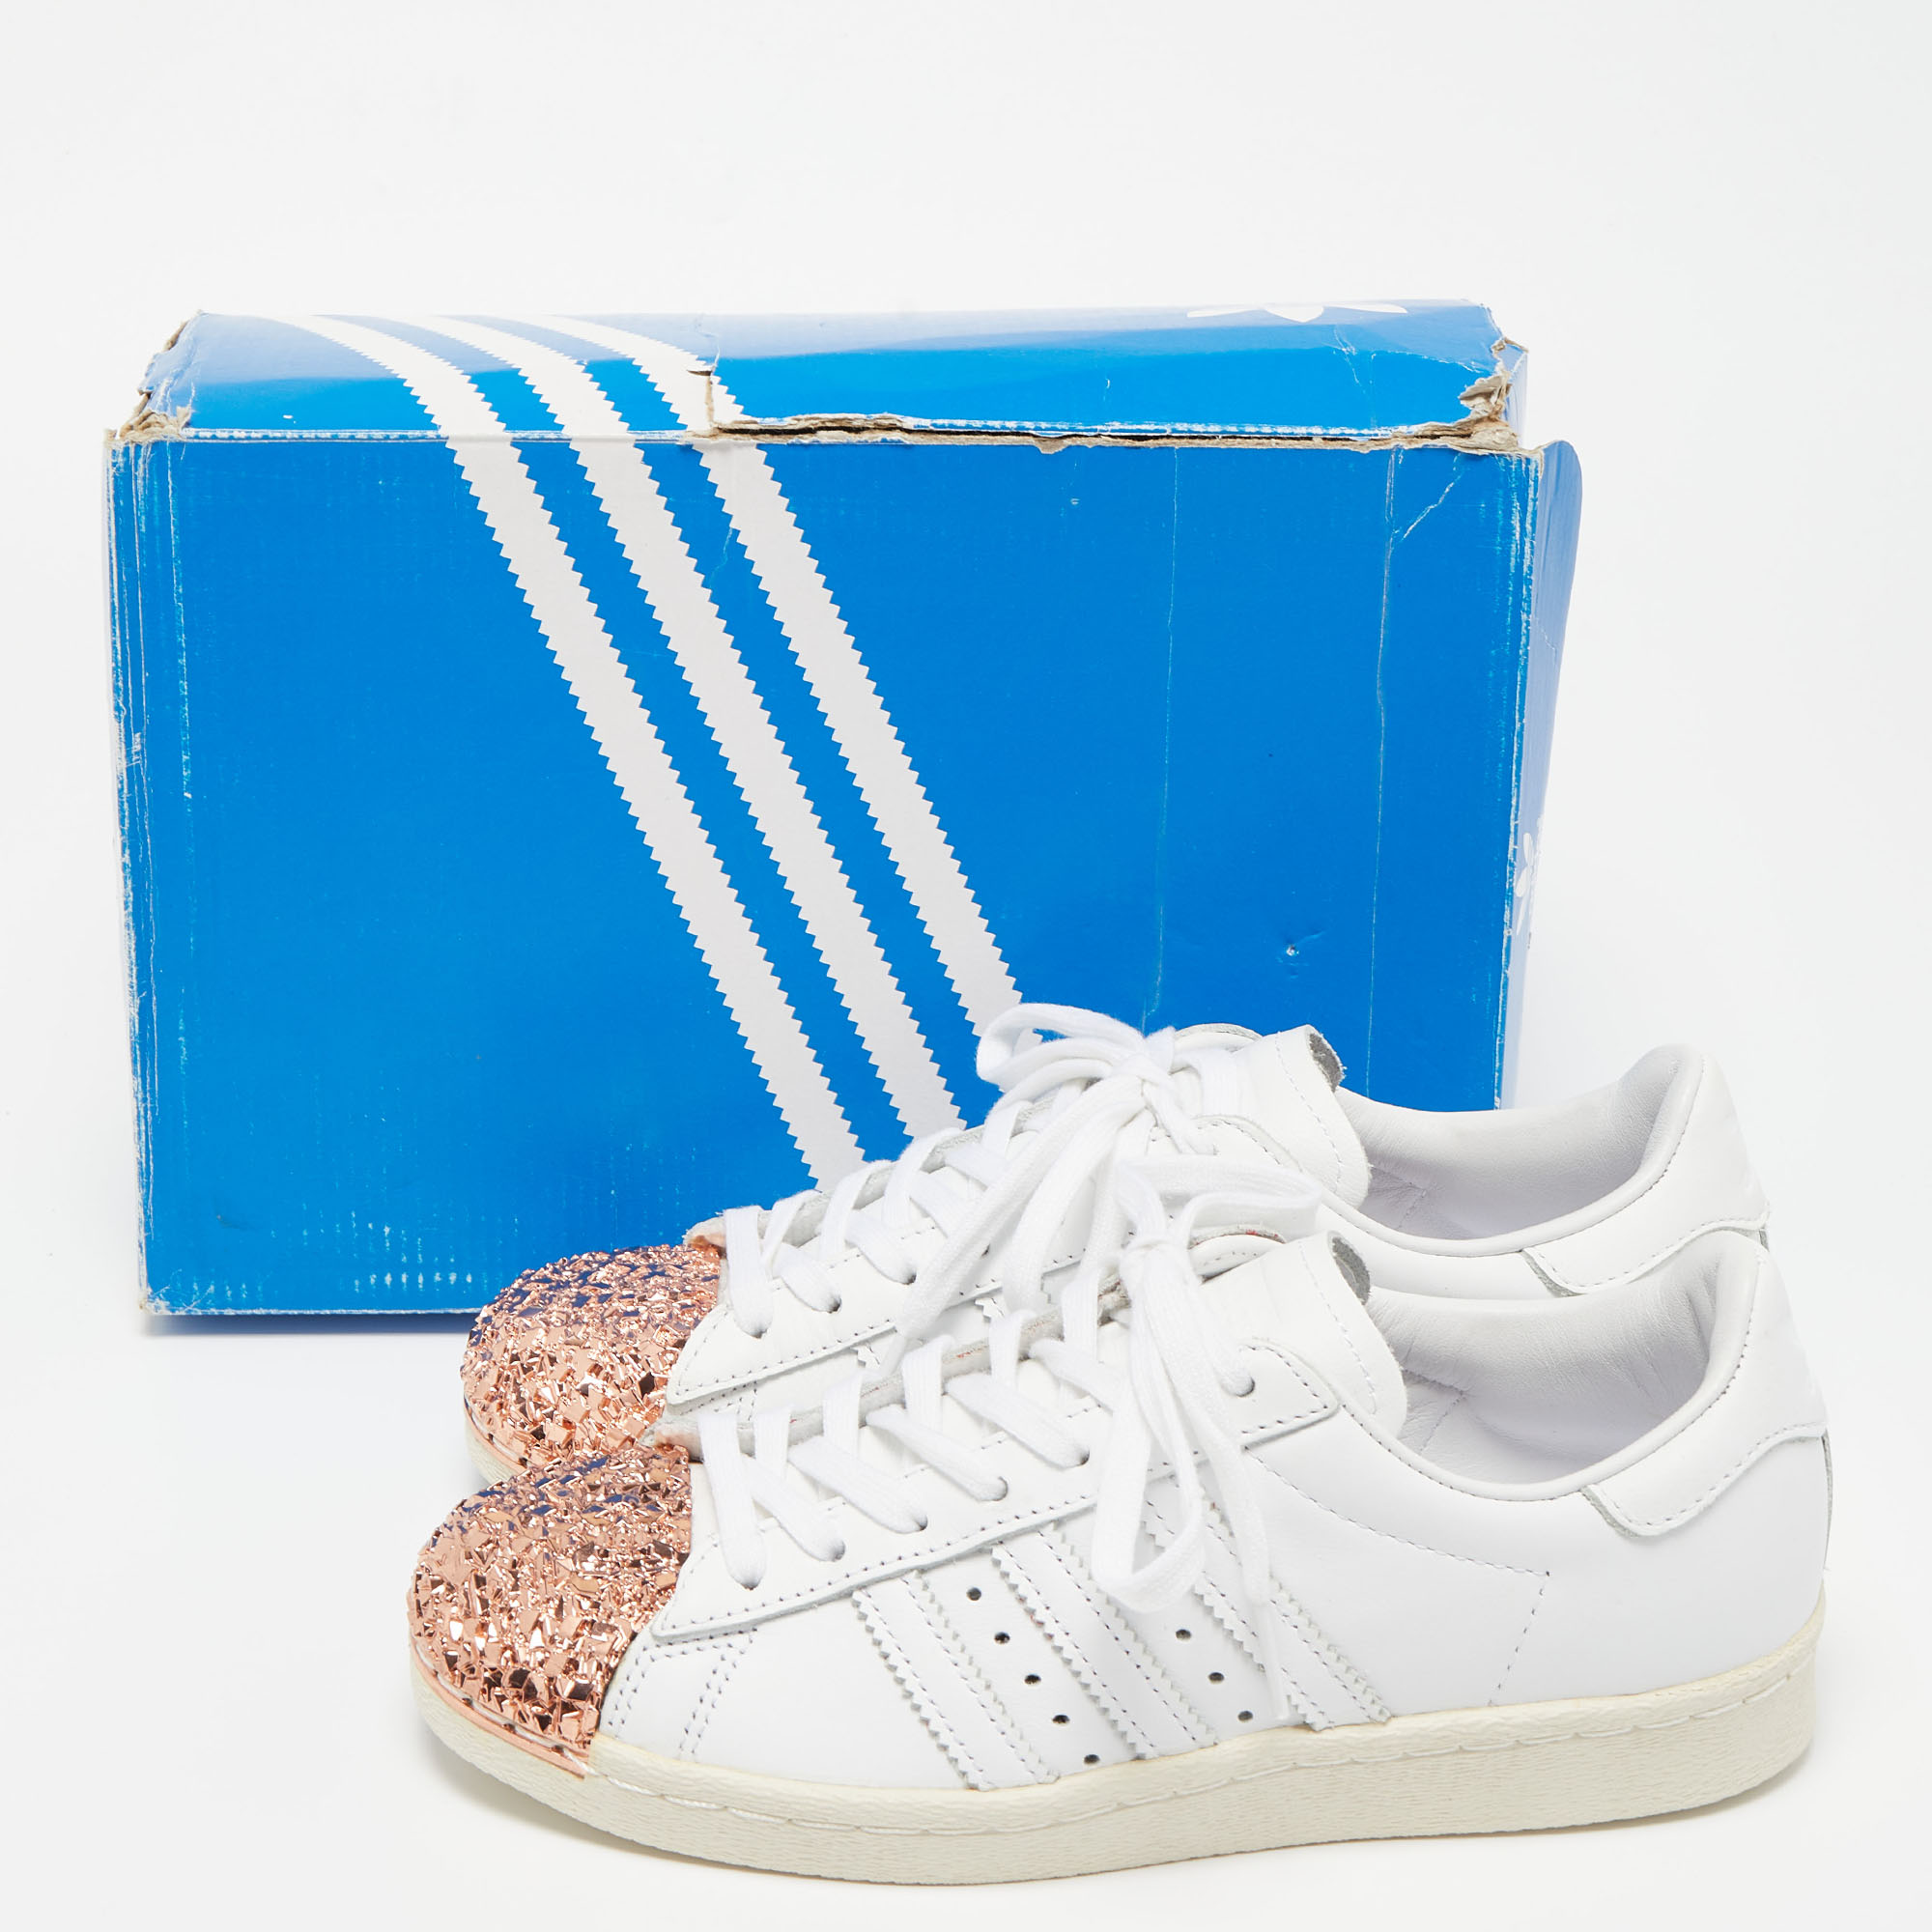 Adidas White/Pink Leather And Metal Superstar Sneakers Size 37.5